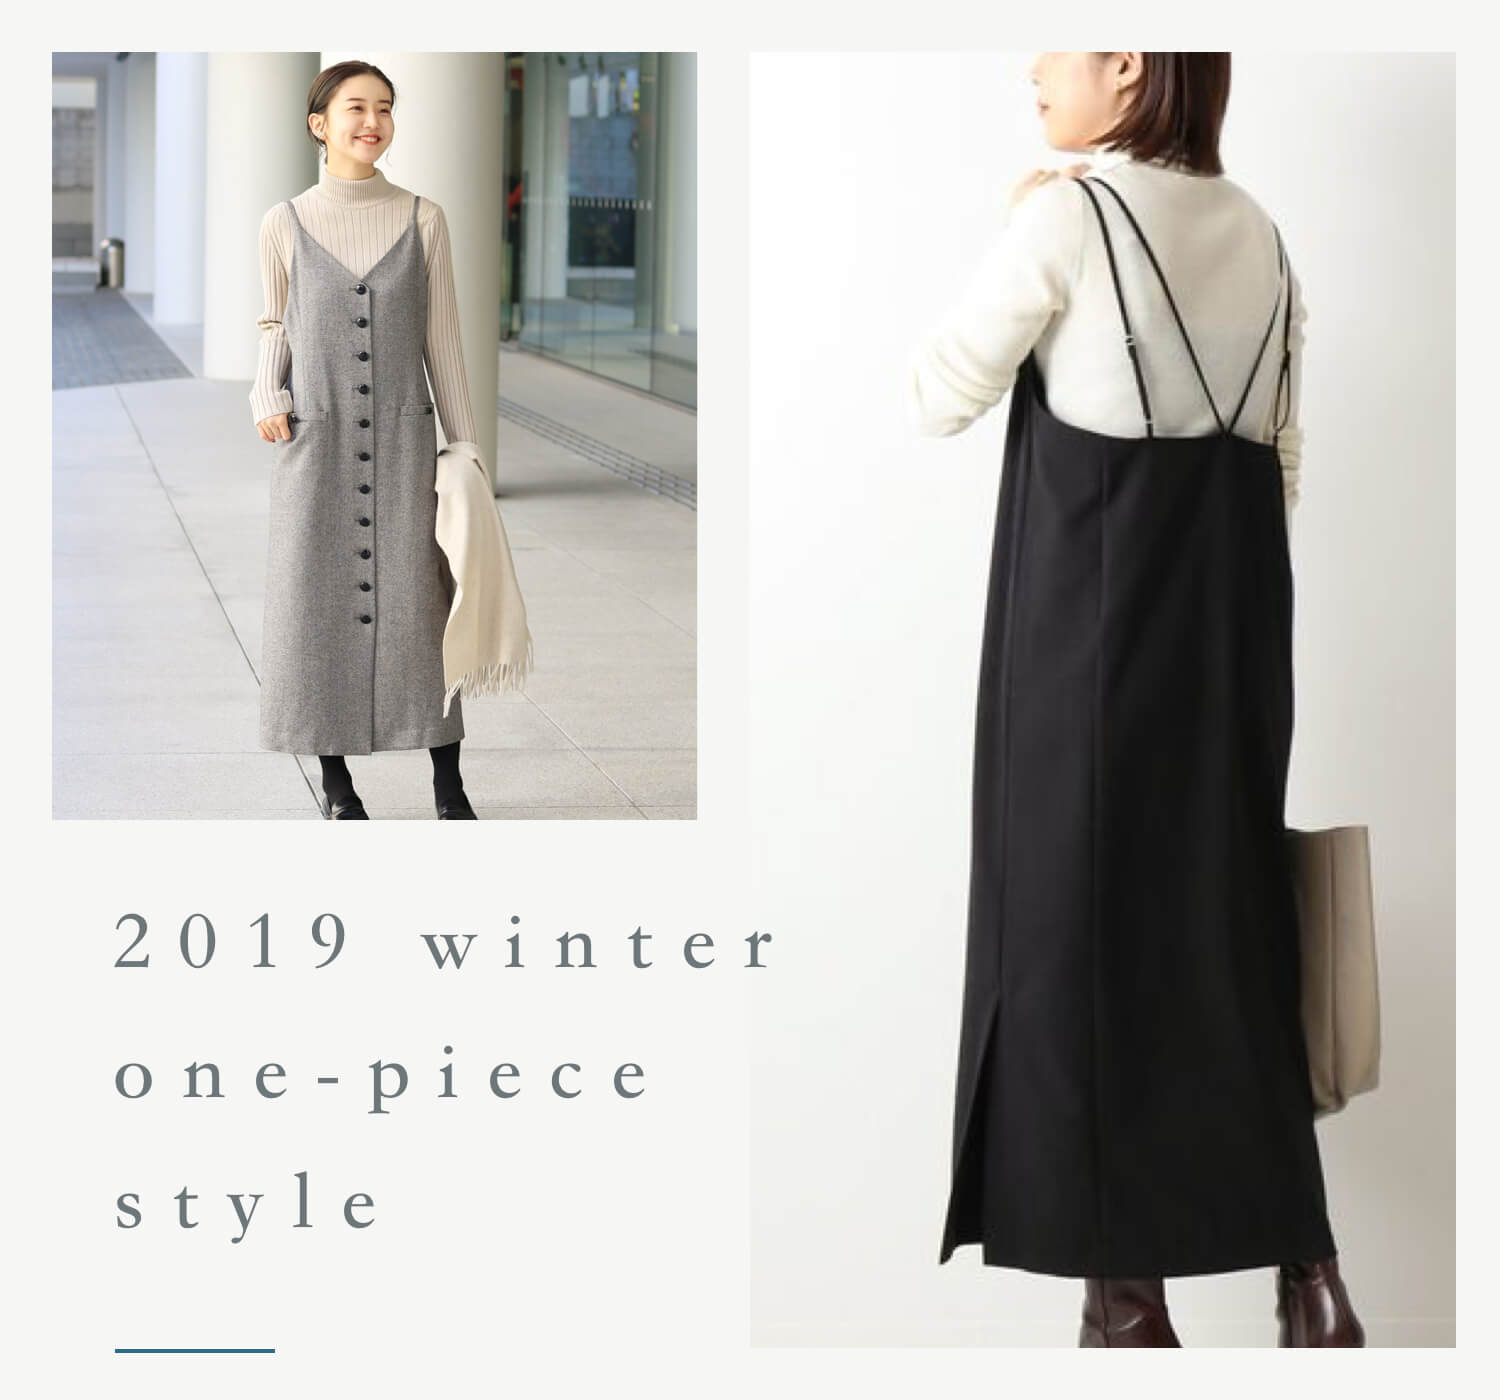 Winter Onepiece Style 冬だってたくさん着たい ワンピースコーデ Baycrew S Store